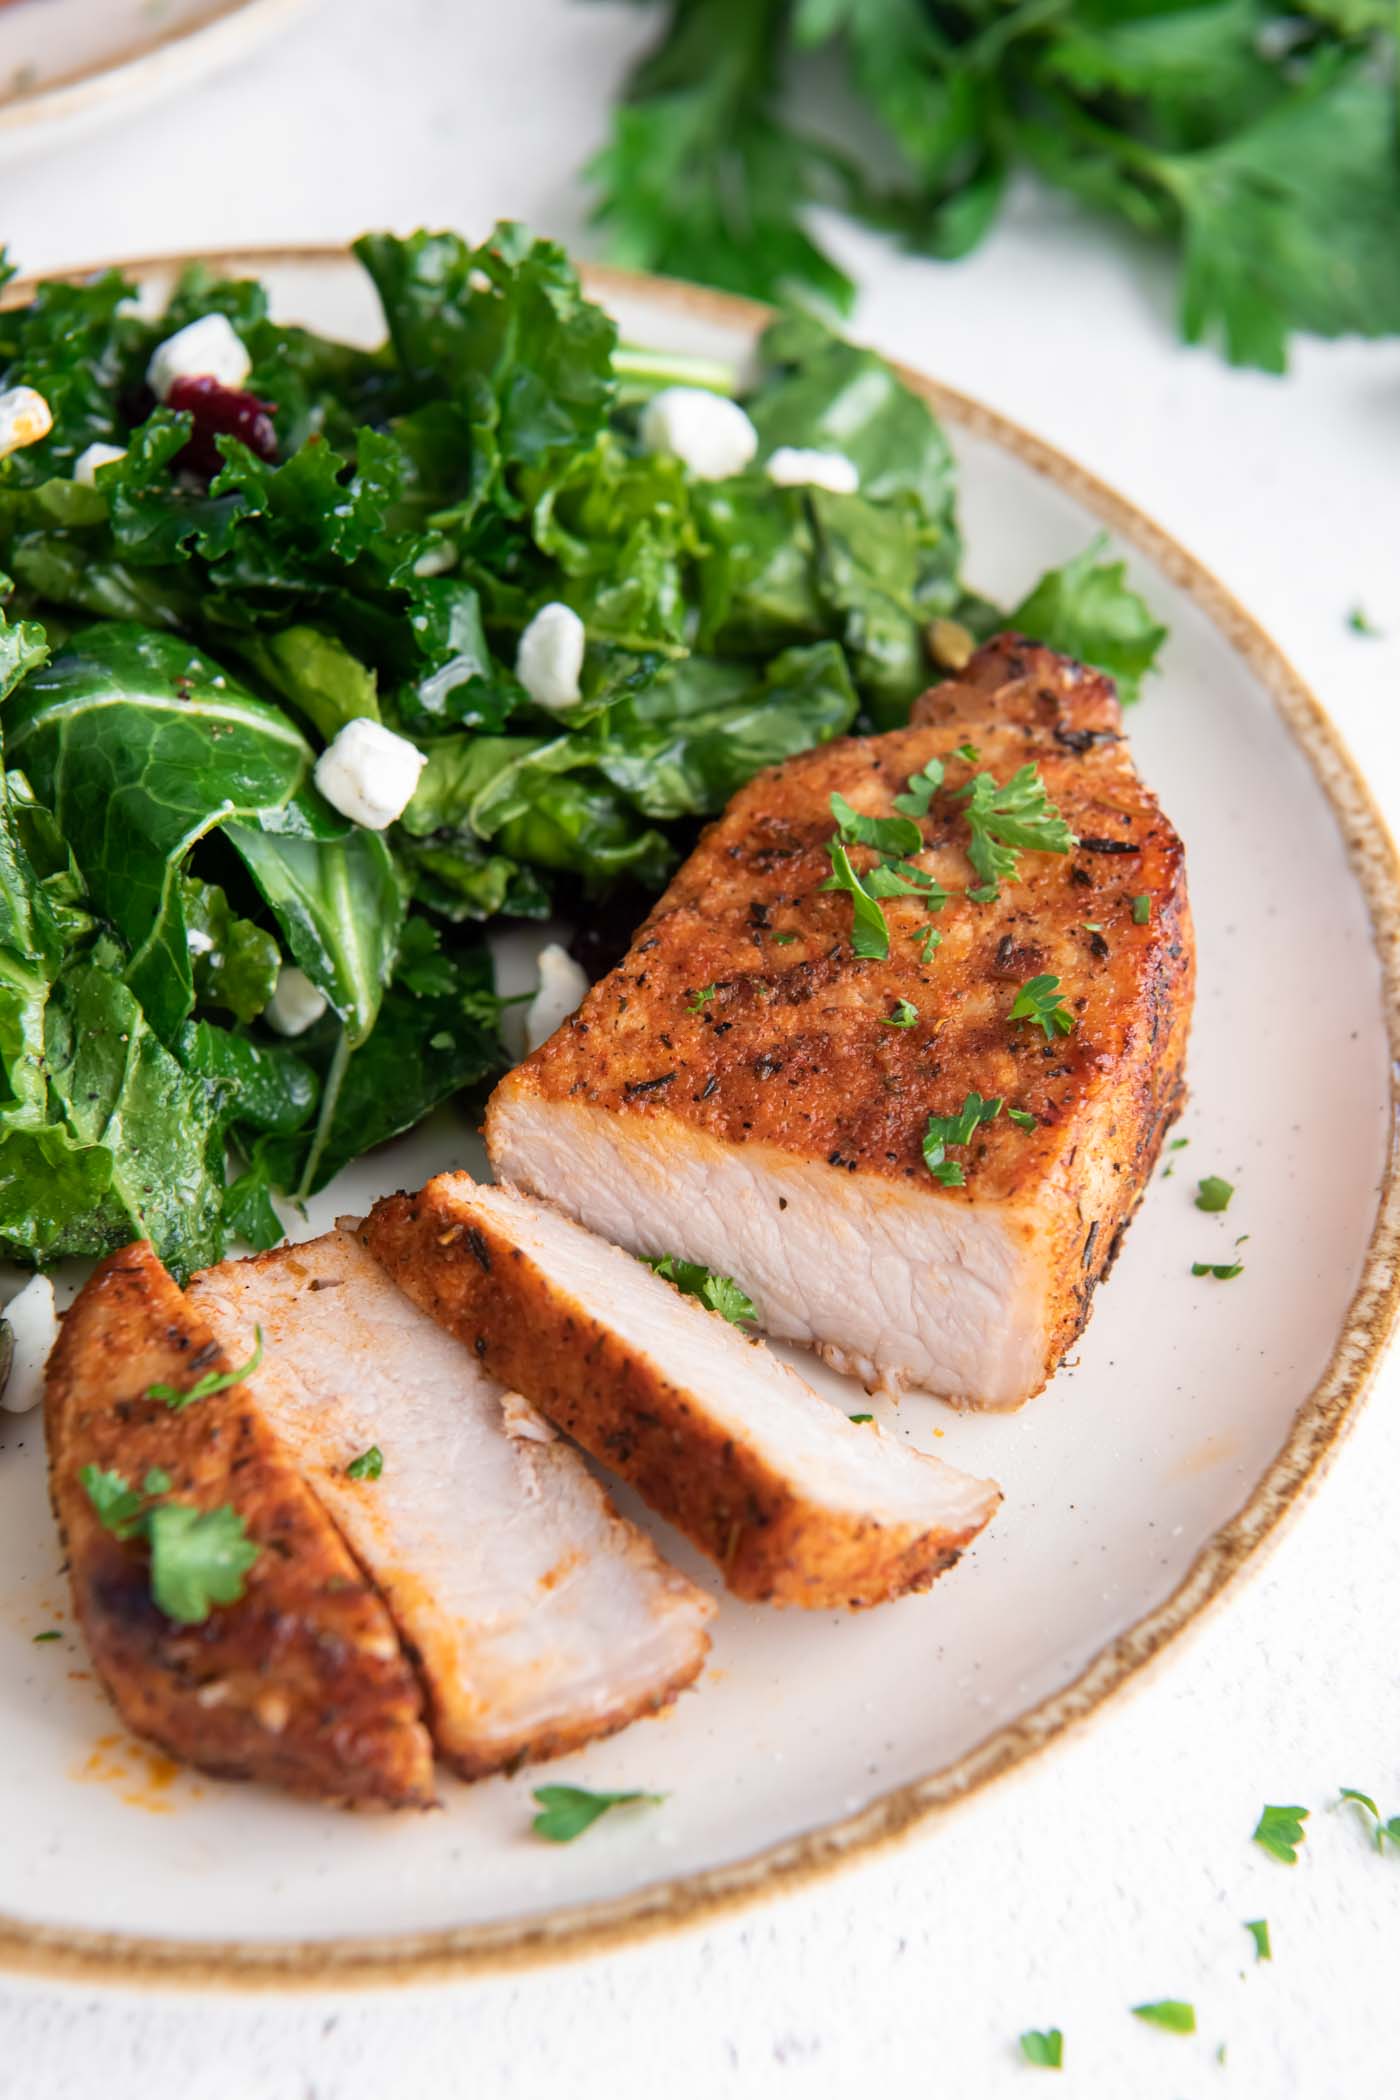 Partially sliced boneless pork chop on a plate served with kale salad.